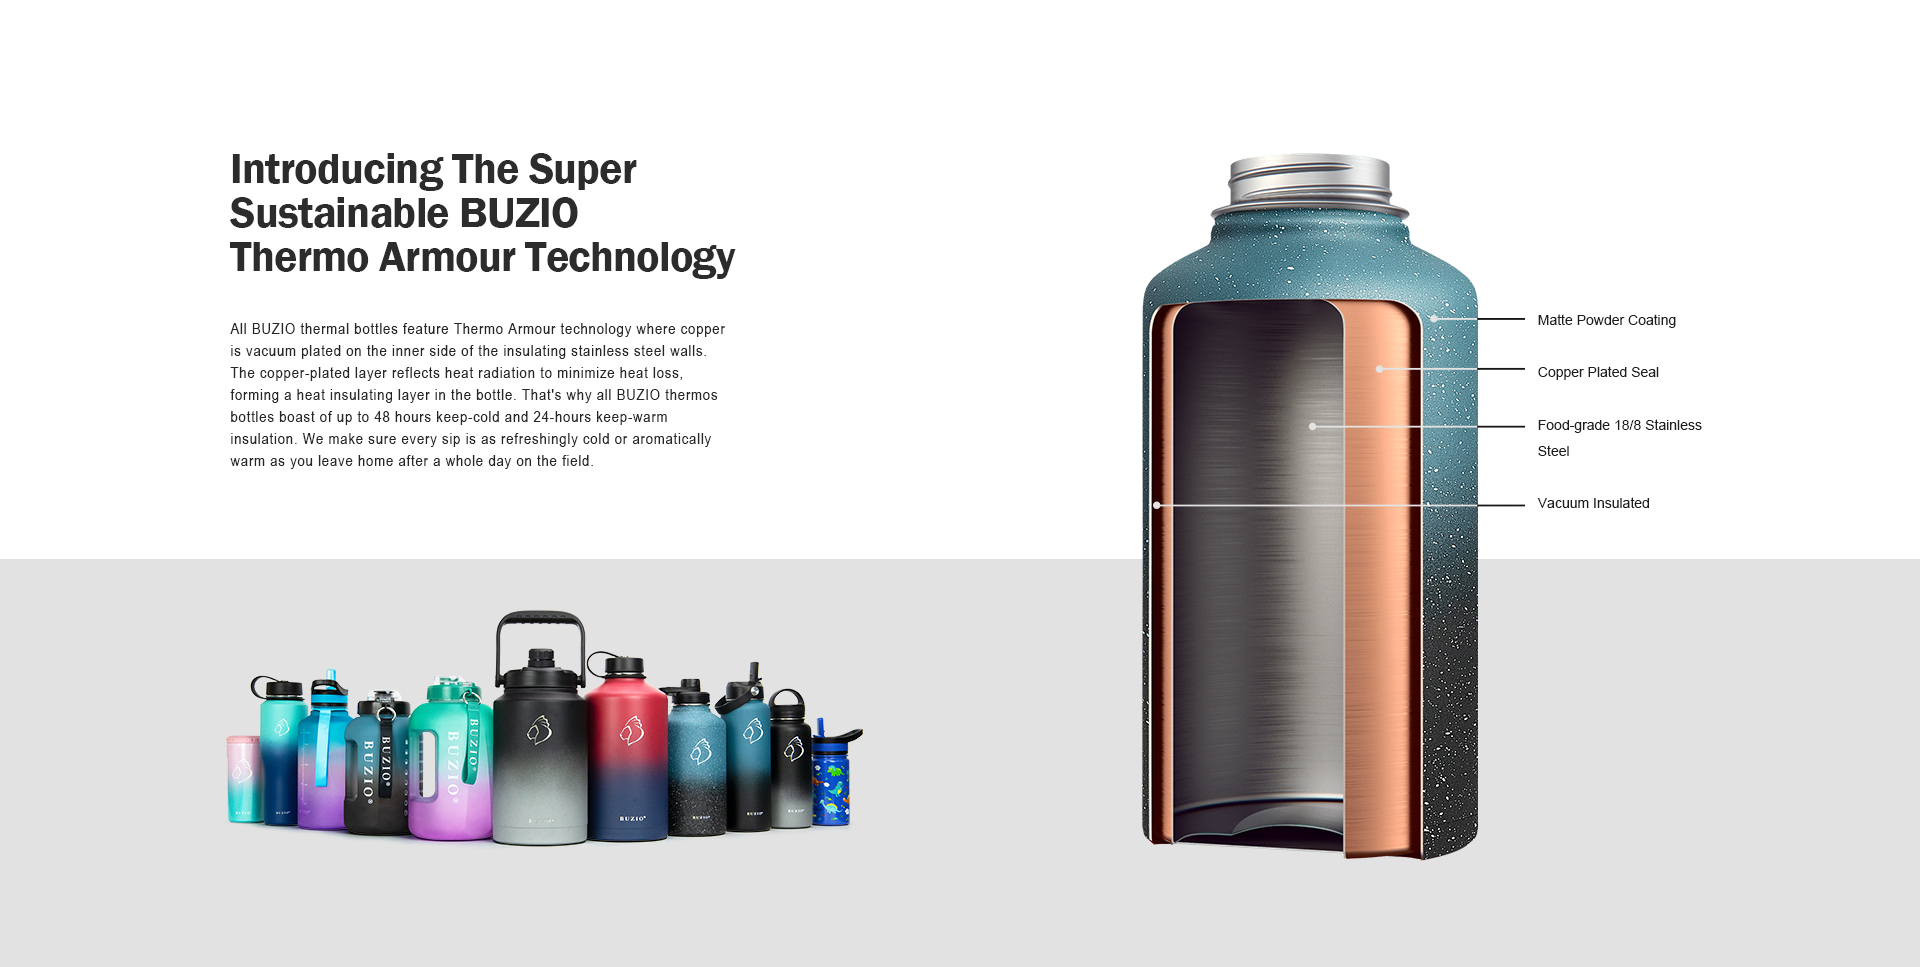 Stay Hydrated and Healthy with Promotional Water Bottles - Blog